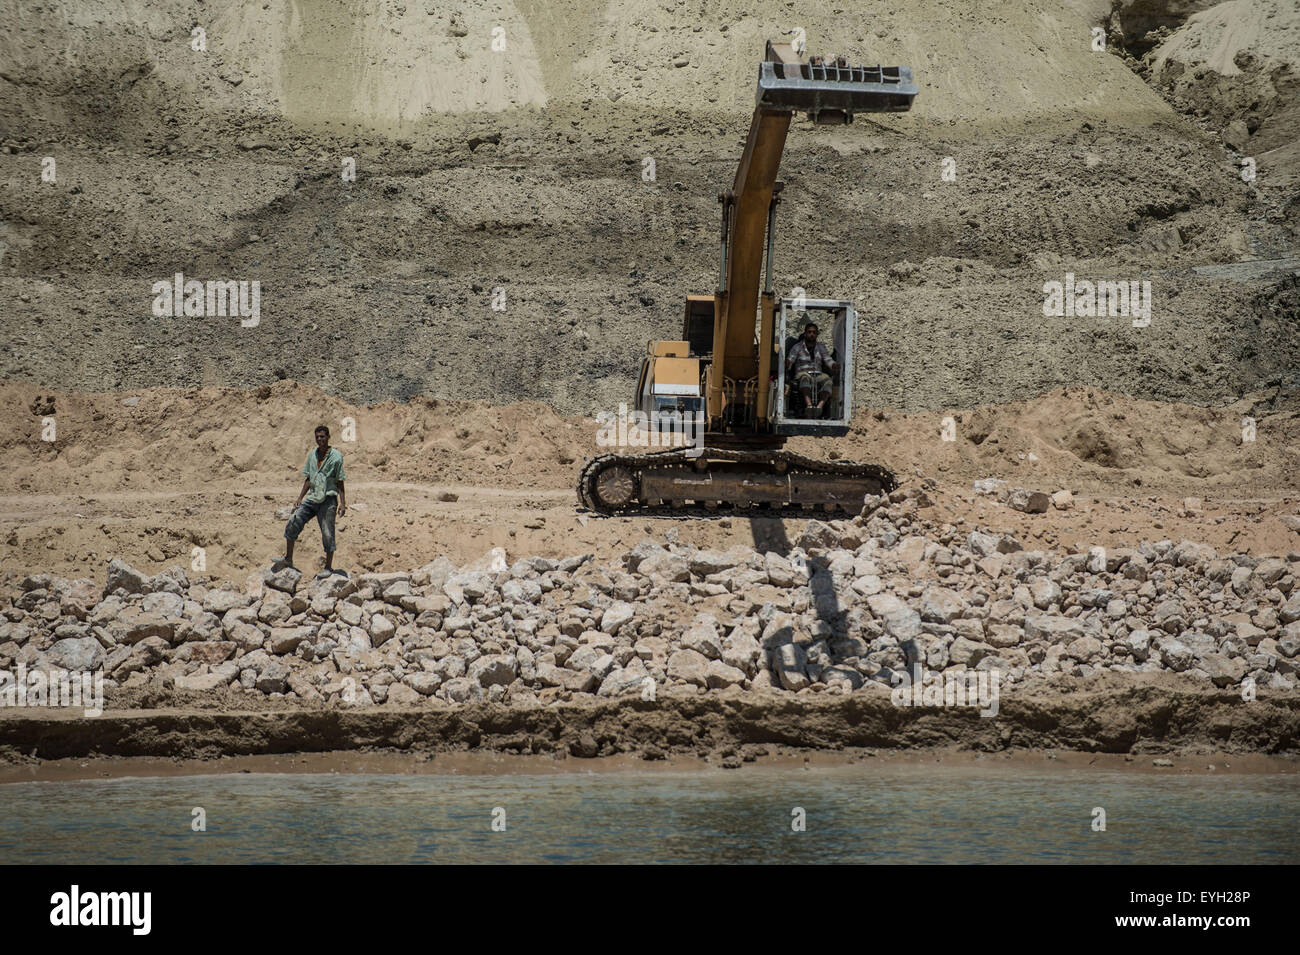 Ismailia, Egypt. 29th July, 2015. Workers are seen on the construction site of the new Suez Canal in Ismailia, a port city in Egypt, on July 29, 2015. The dredging work of Egypt's 'New Suez Canal' has been completed and the waterway is ready as well as safe for huge ship navigation, Mohab Memish, head of the Suez Canal Authority (SCA), told reporters in a press conference Wednesday. © Pan Chaoyue/Xinhua/Alamy Live News Stock Photo